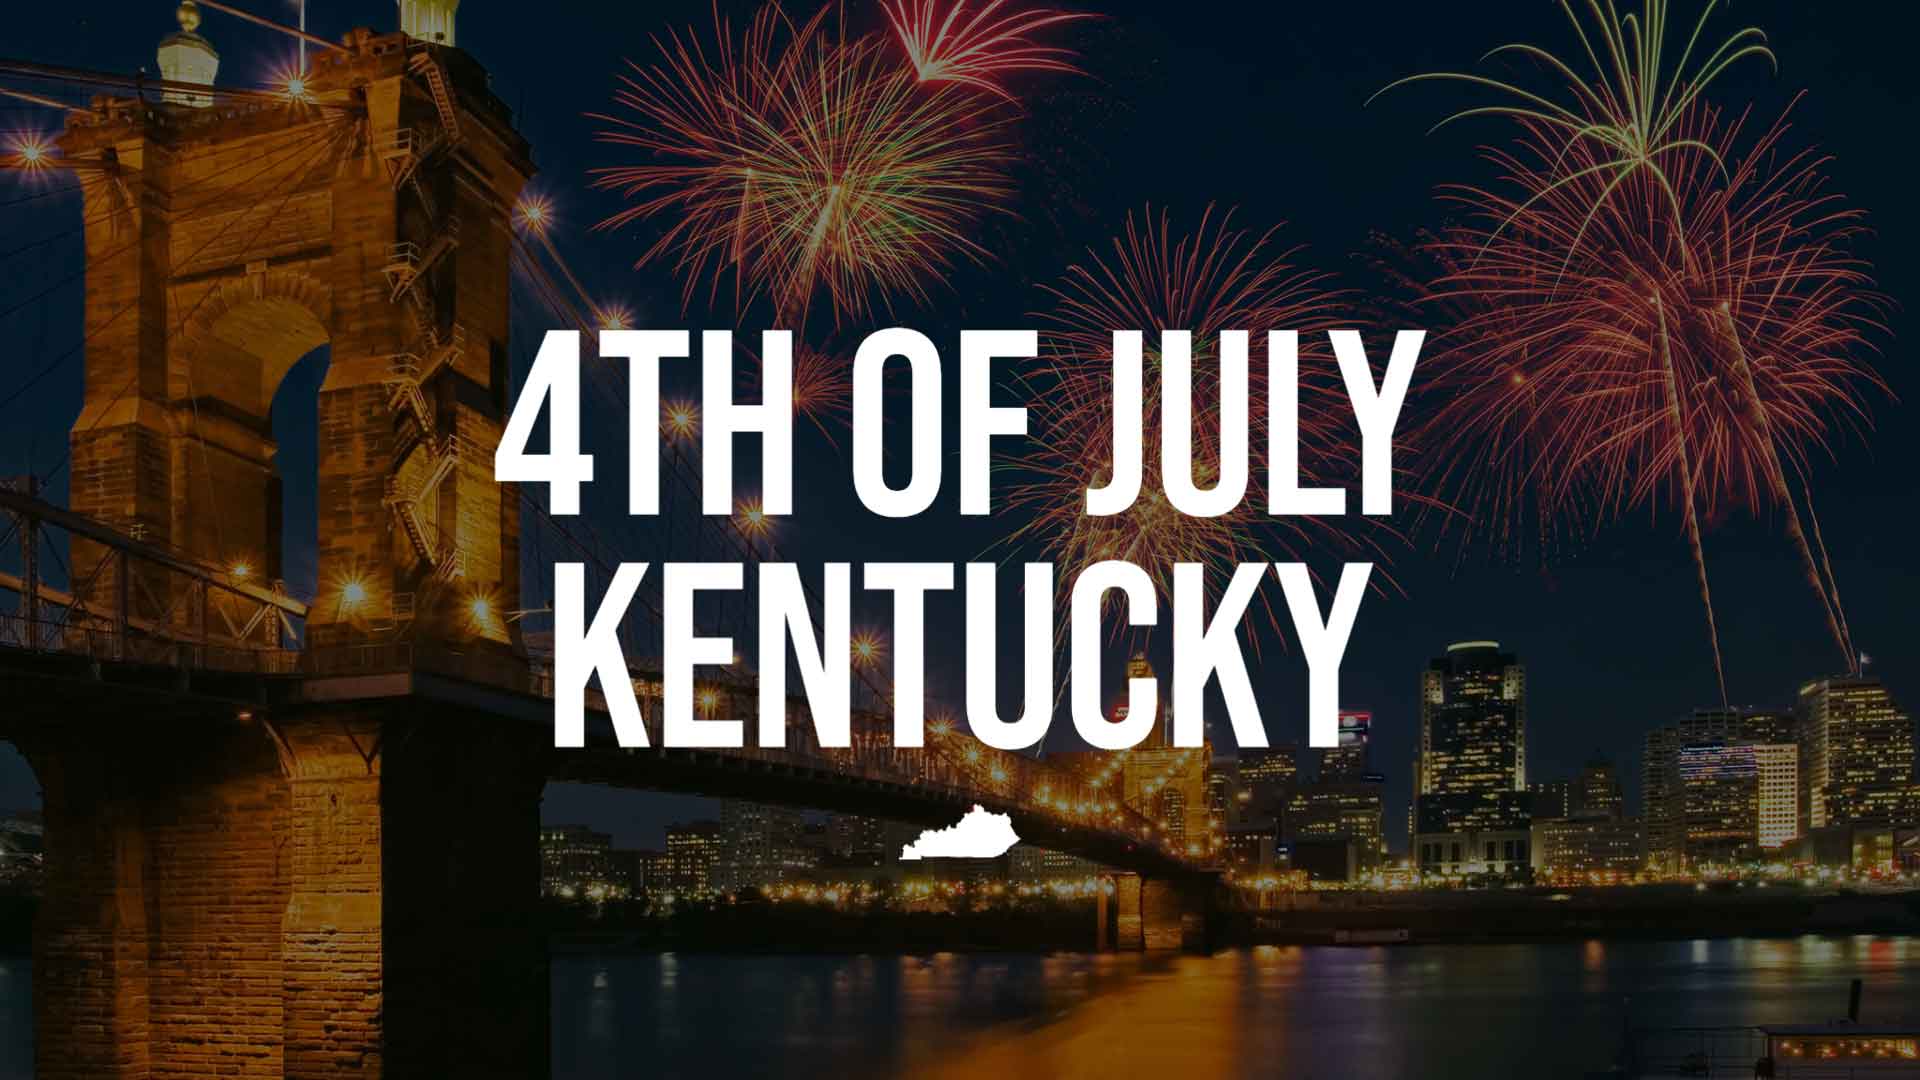 4th Of July Kentucky Independence Day Events and Things to Do in KY